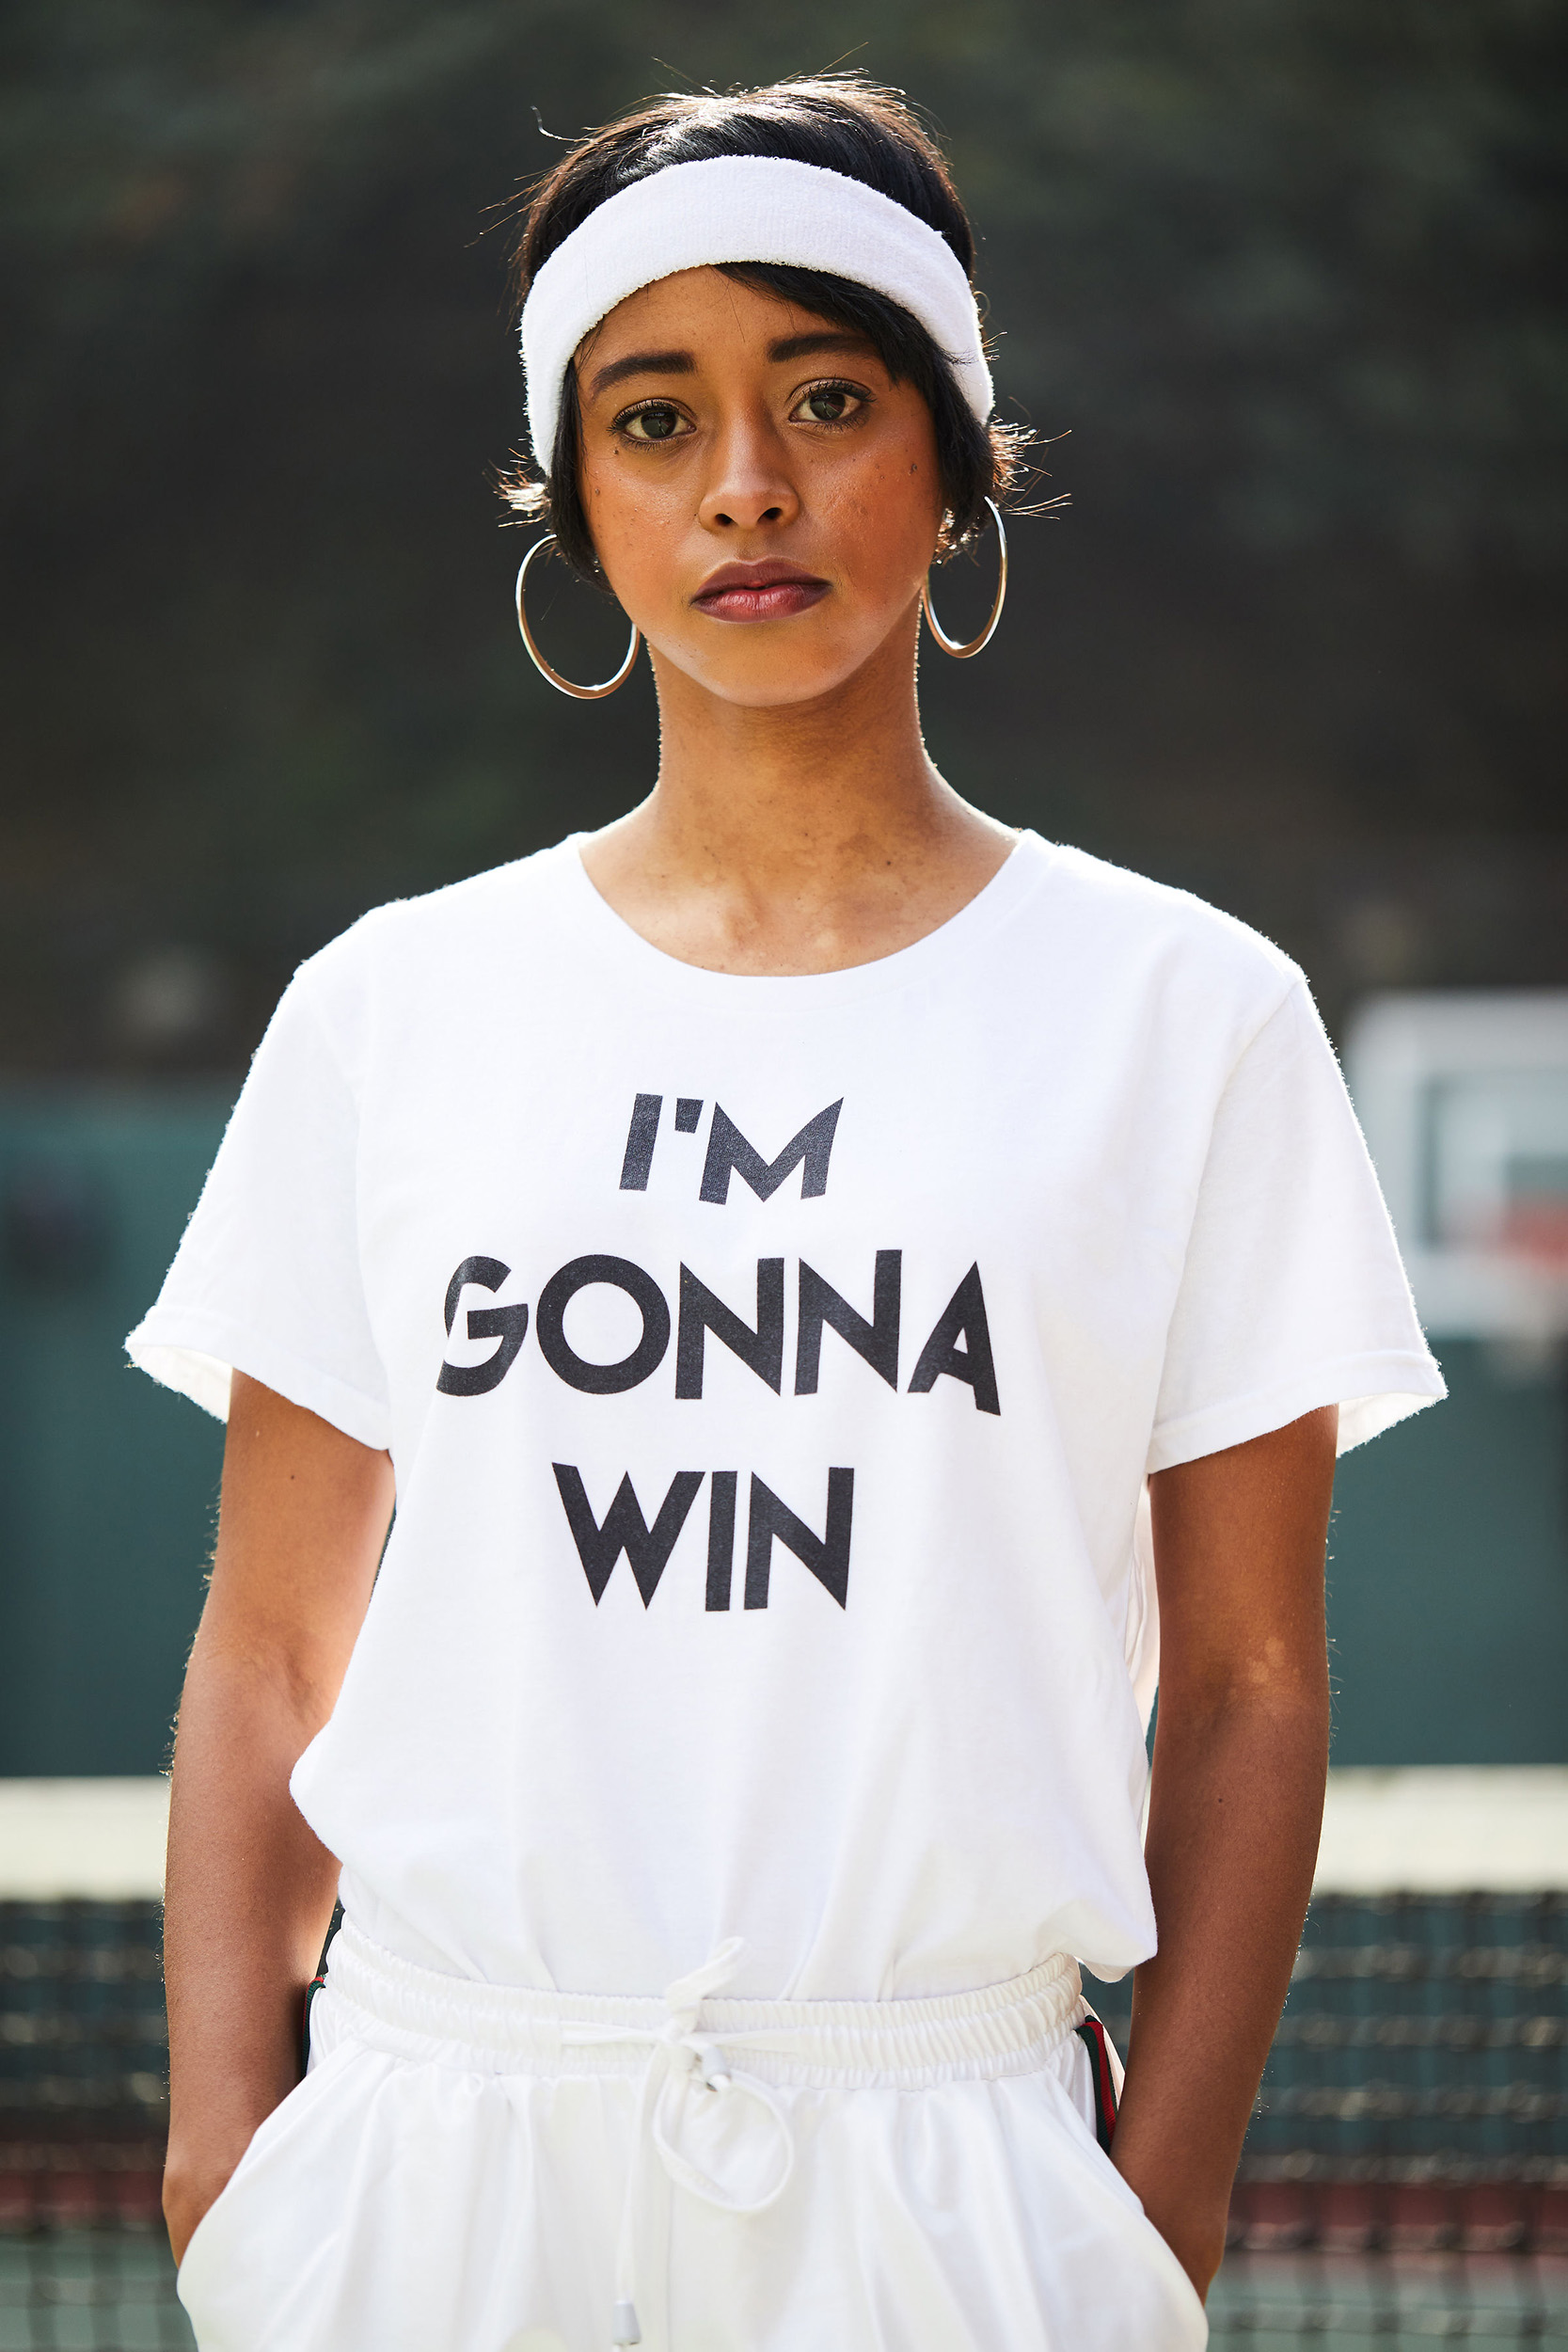 PHOTO: A new campaign called "I'm gonna win" seeks to honor Diana Ross on her 75th birthday with female black celebrities sharing images of themselves wearing shirts with the slogan on their front.